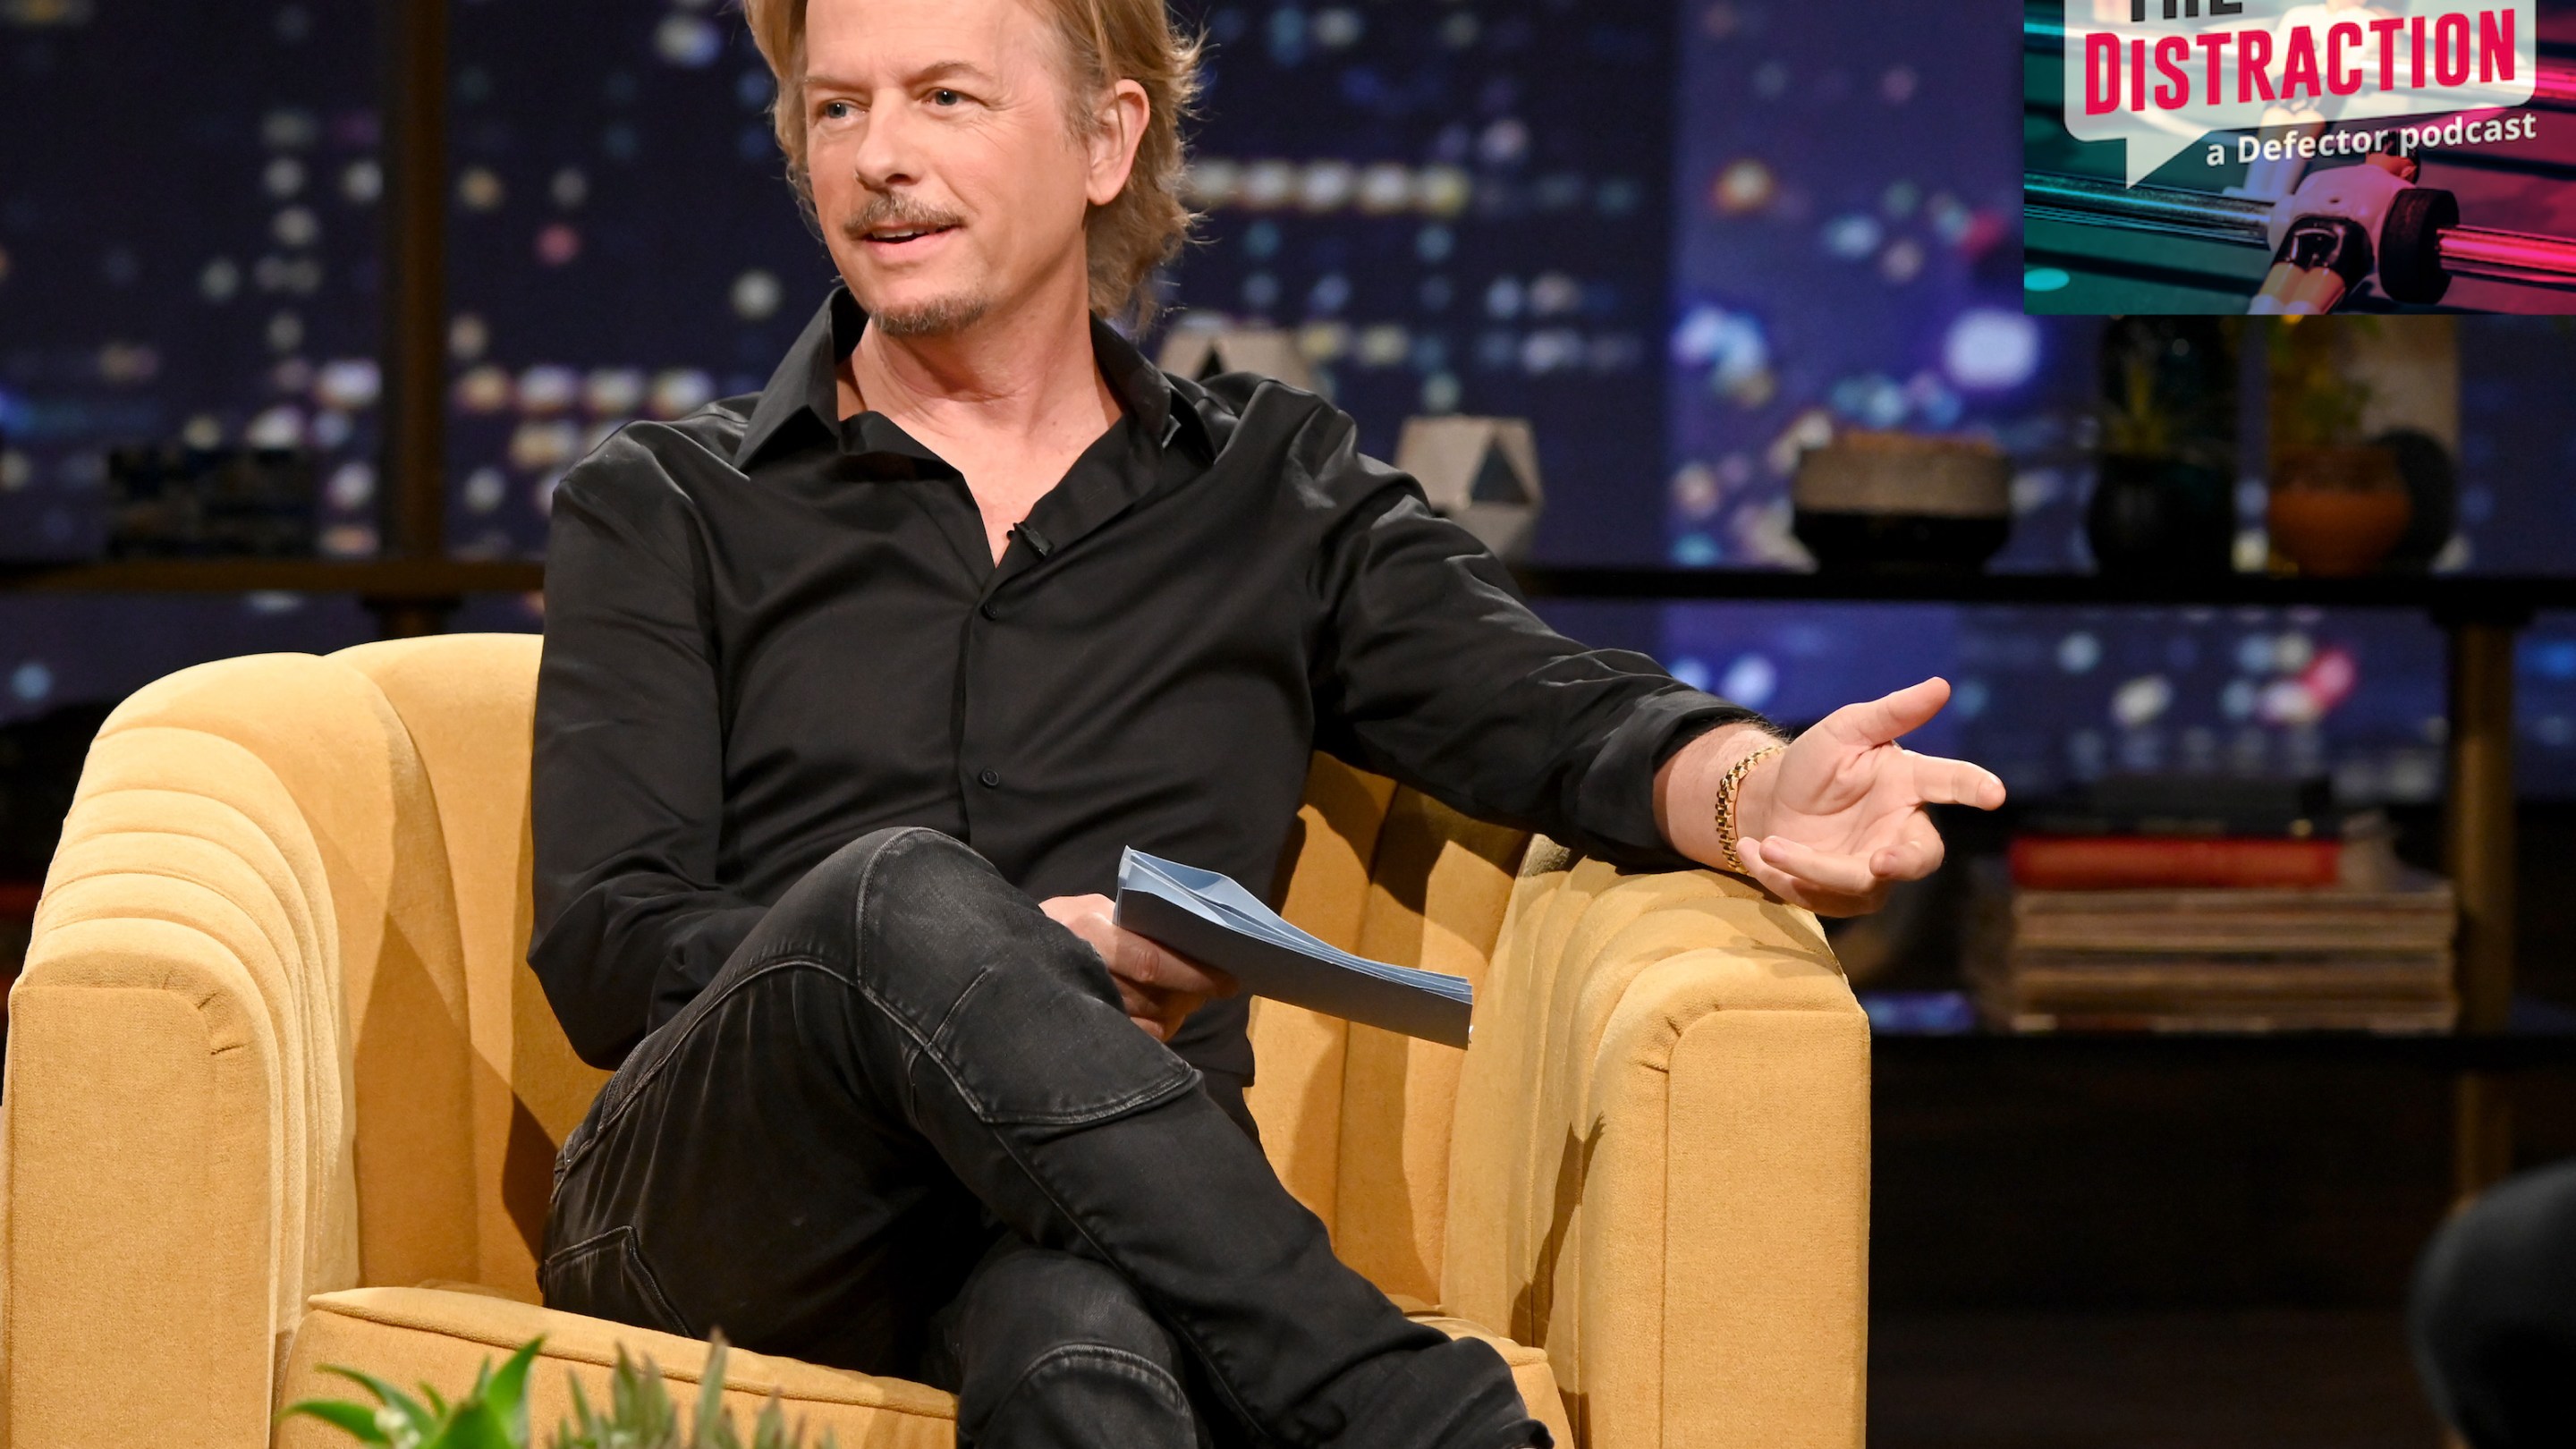 David Spade on the set of his 2019 late-night series on Comedy Central.